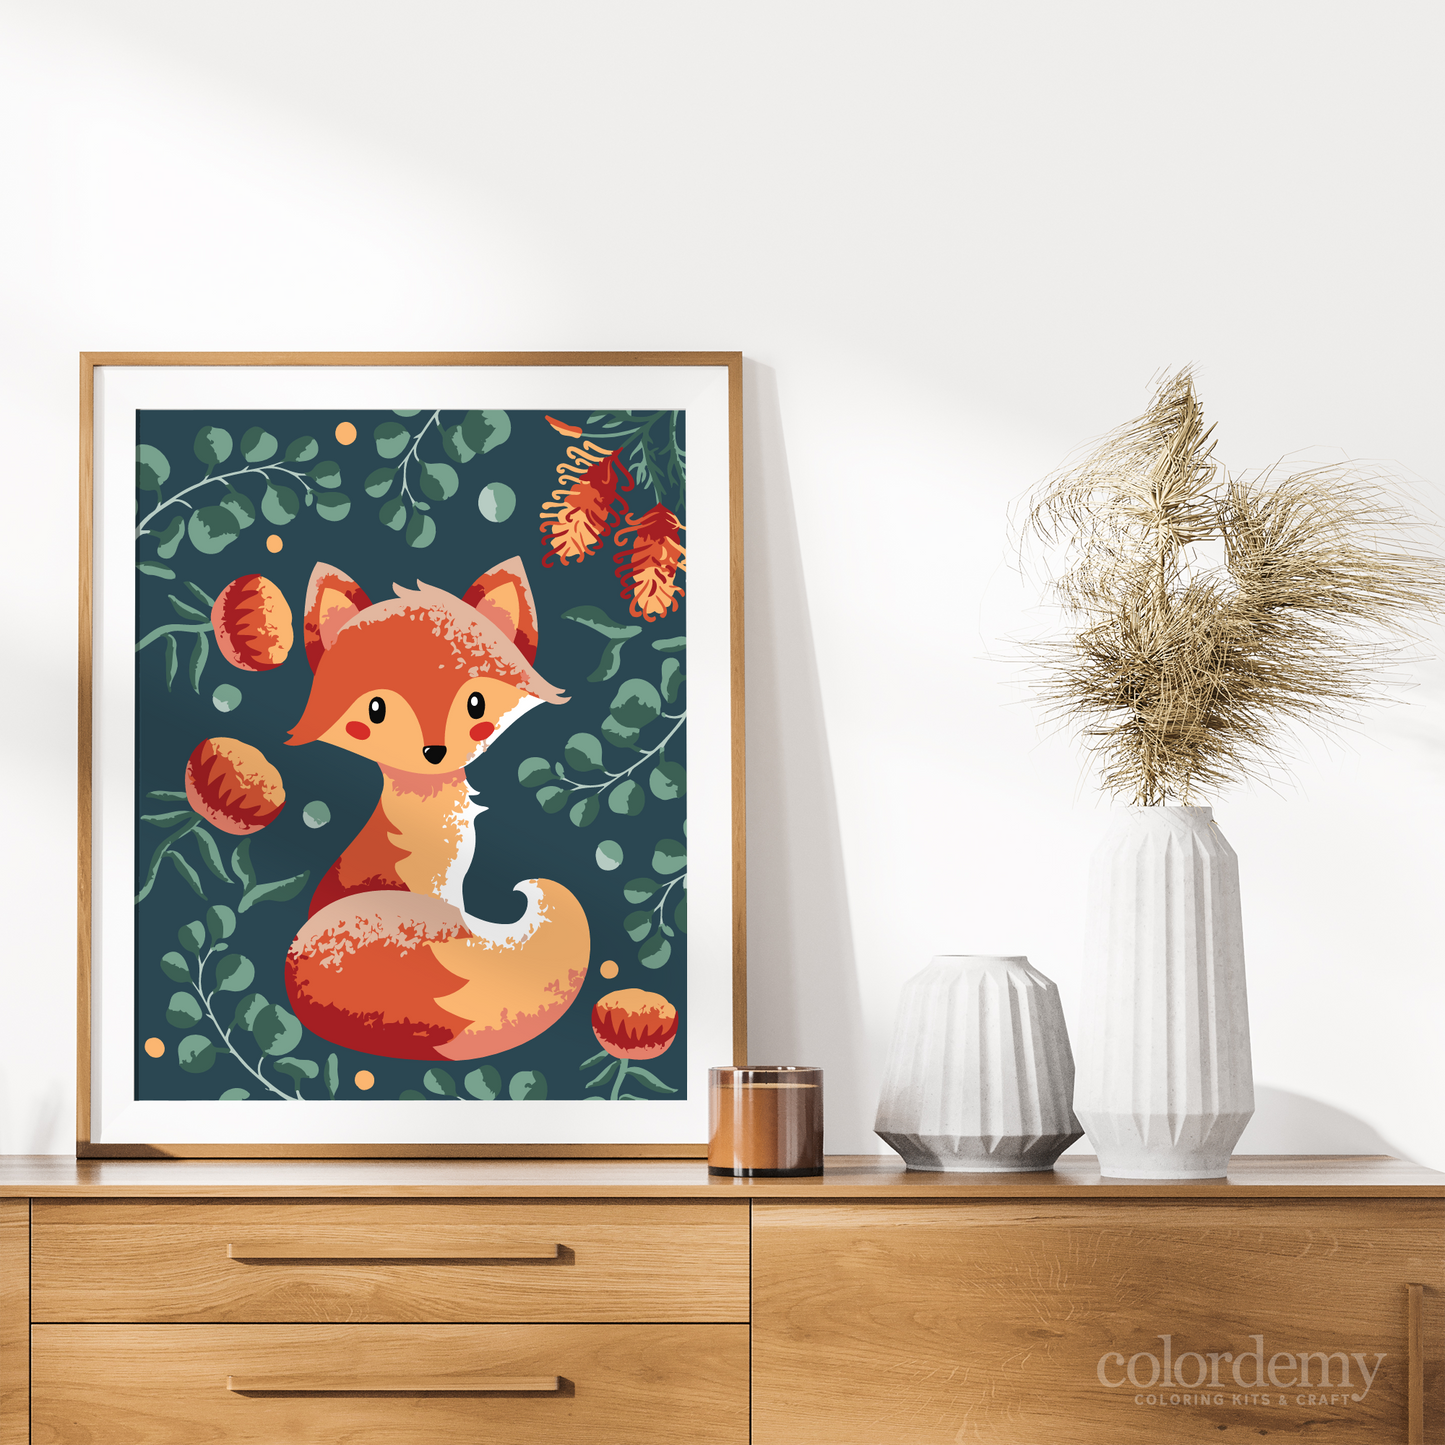 40x50cm Paint by Numbers Kit: Fox's Haven: Cute Fox with Leafy Background